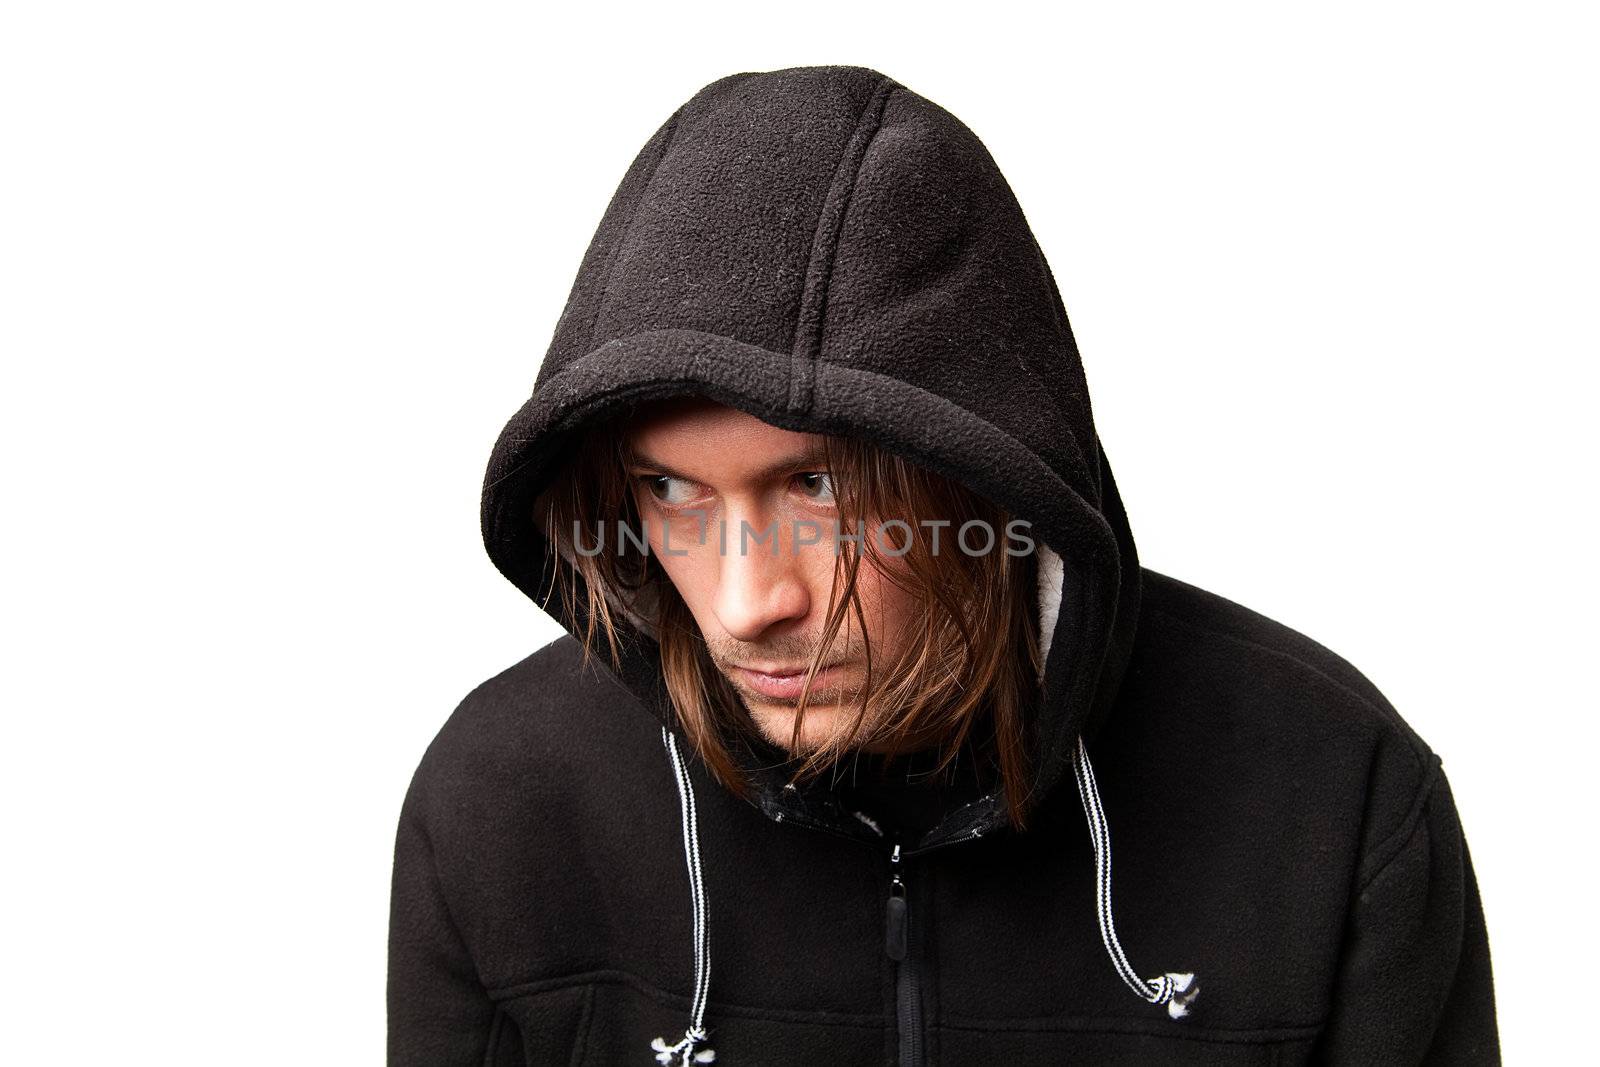 evil guy in a hood on white background